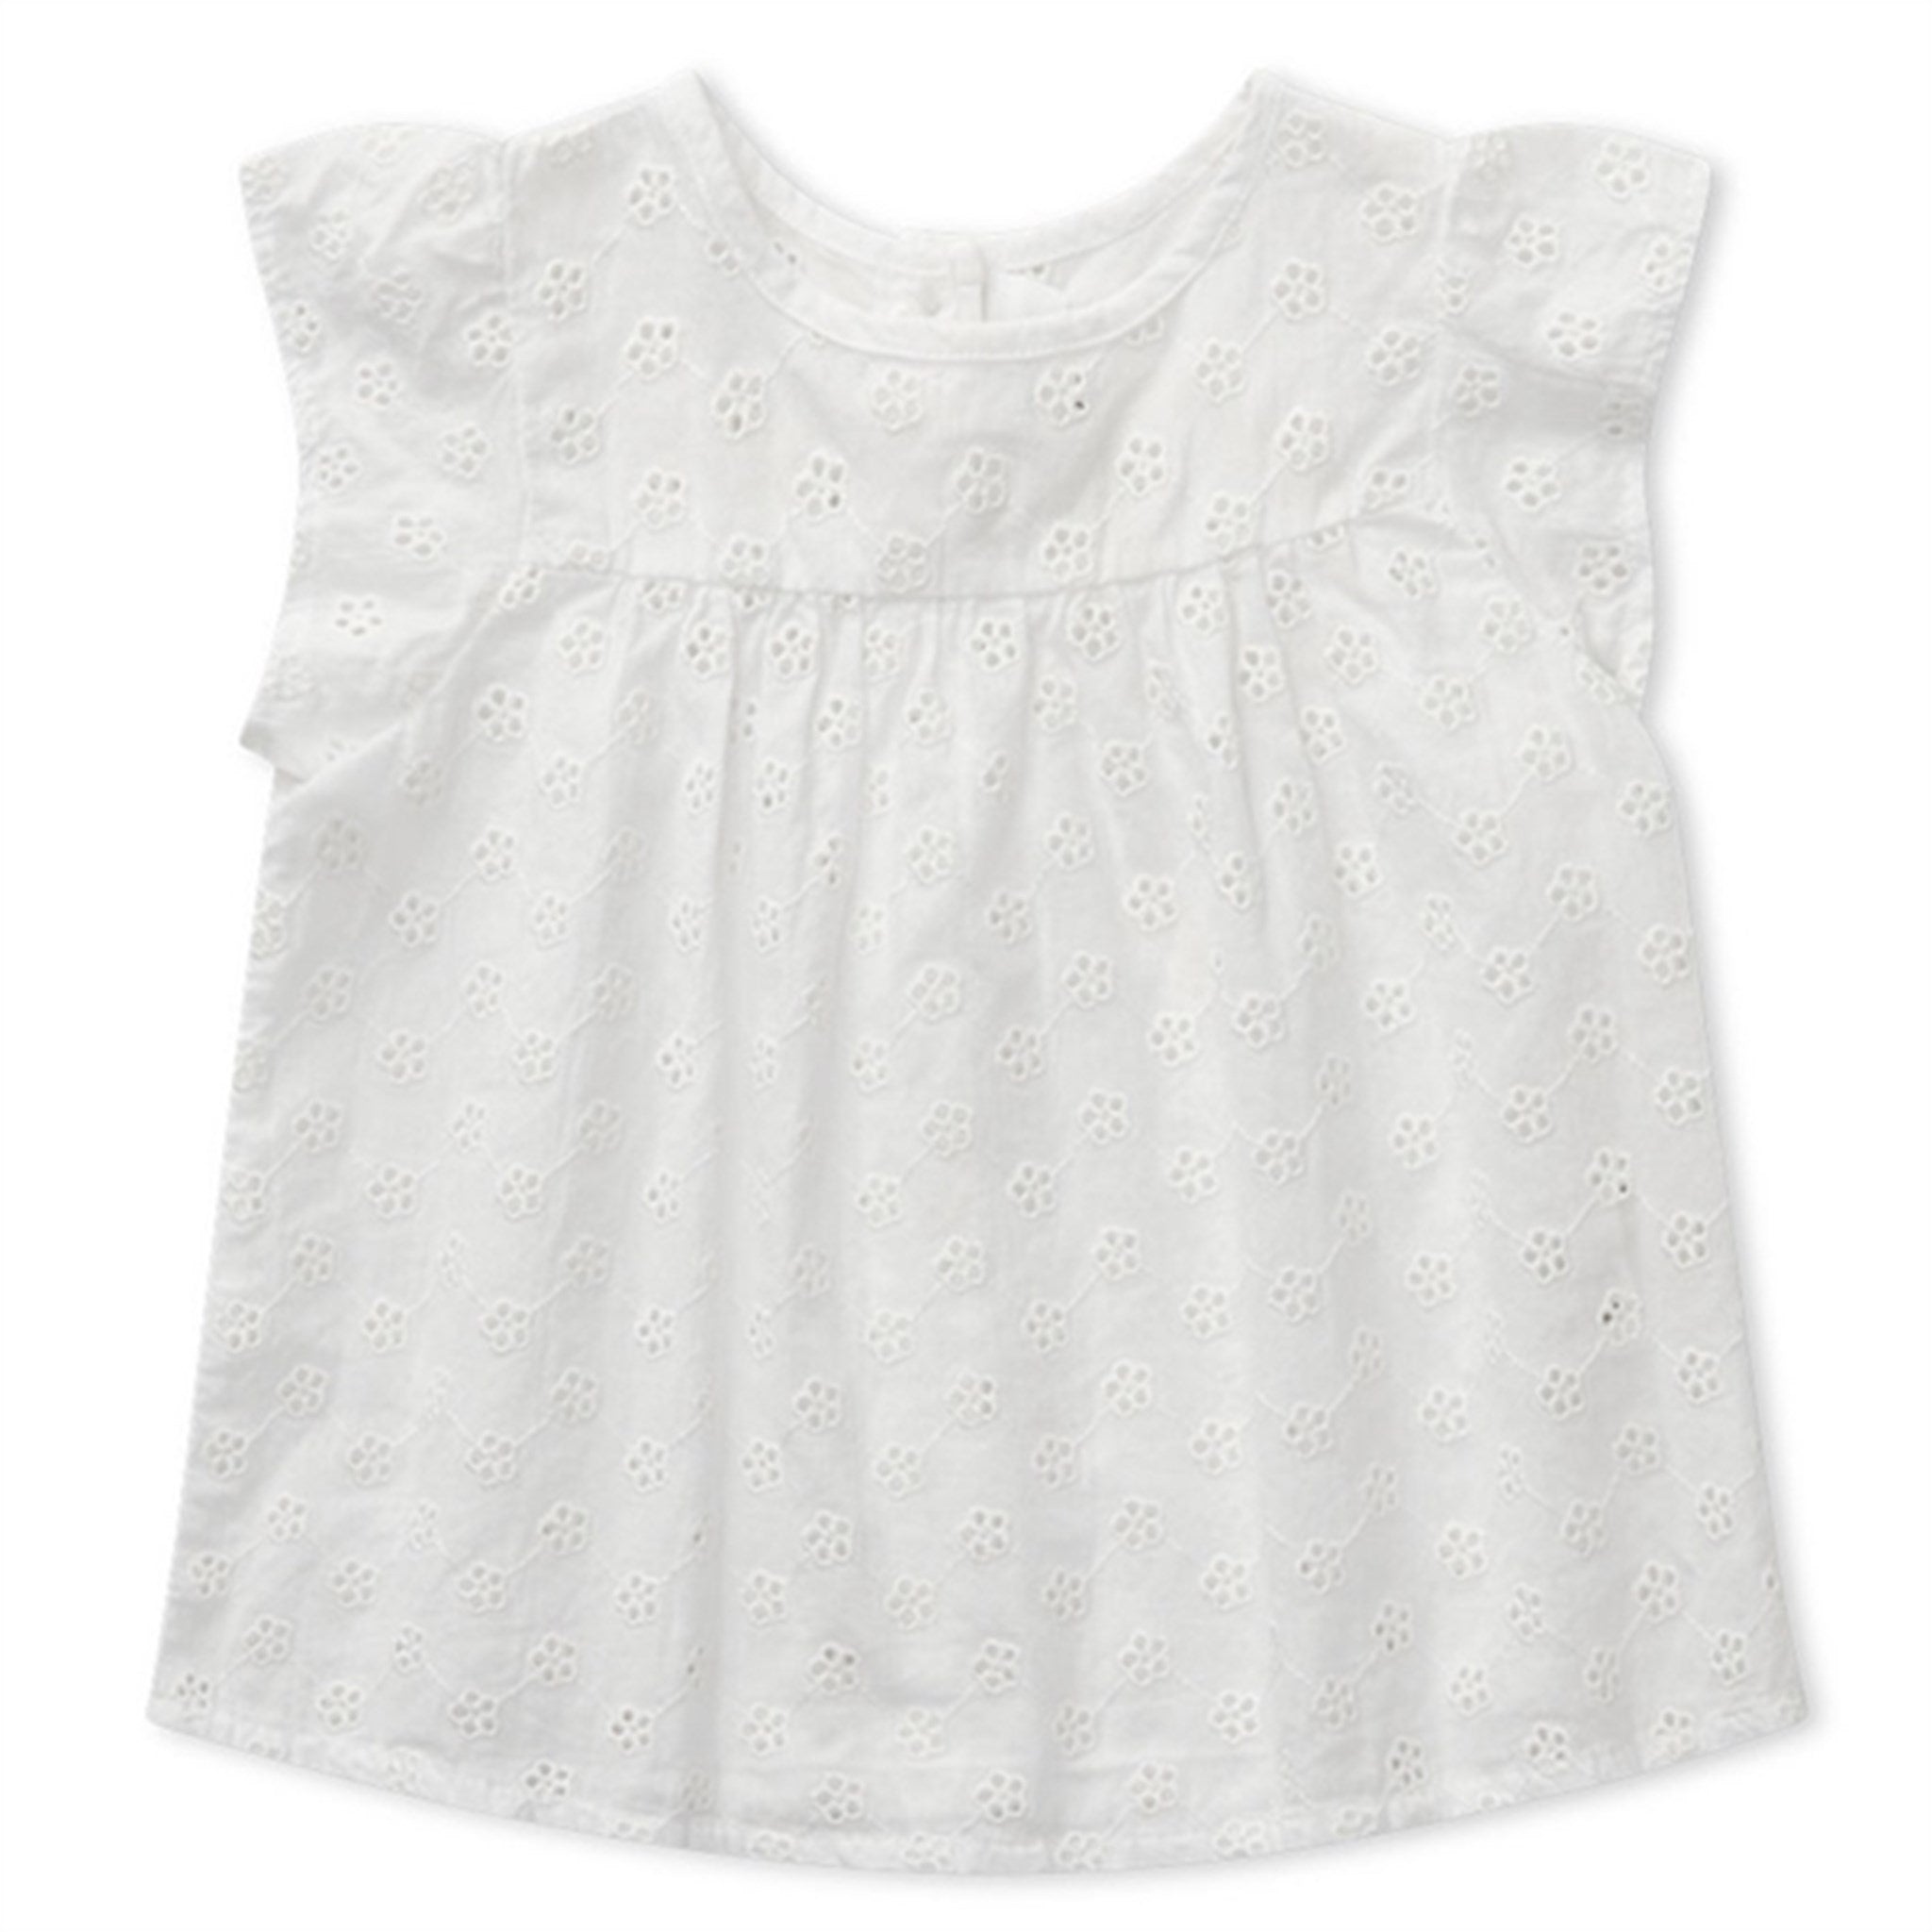 lalaby Natural white Daisy Top Baby